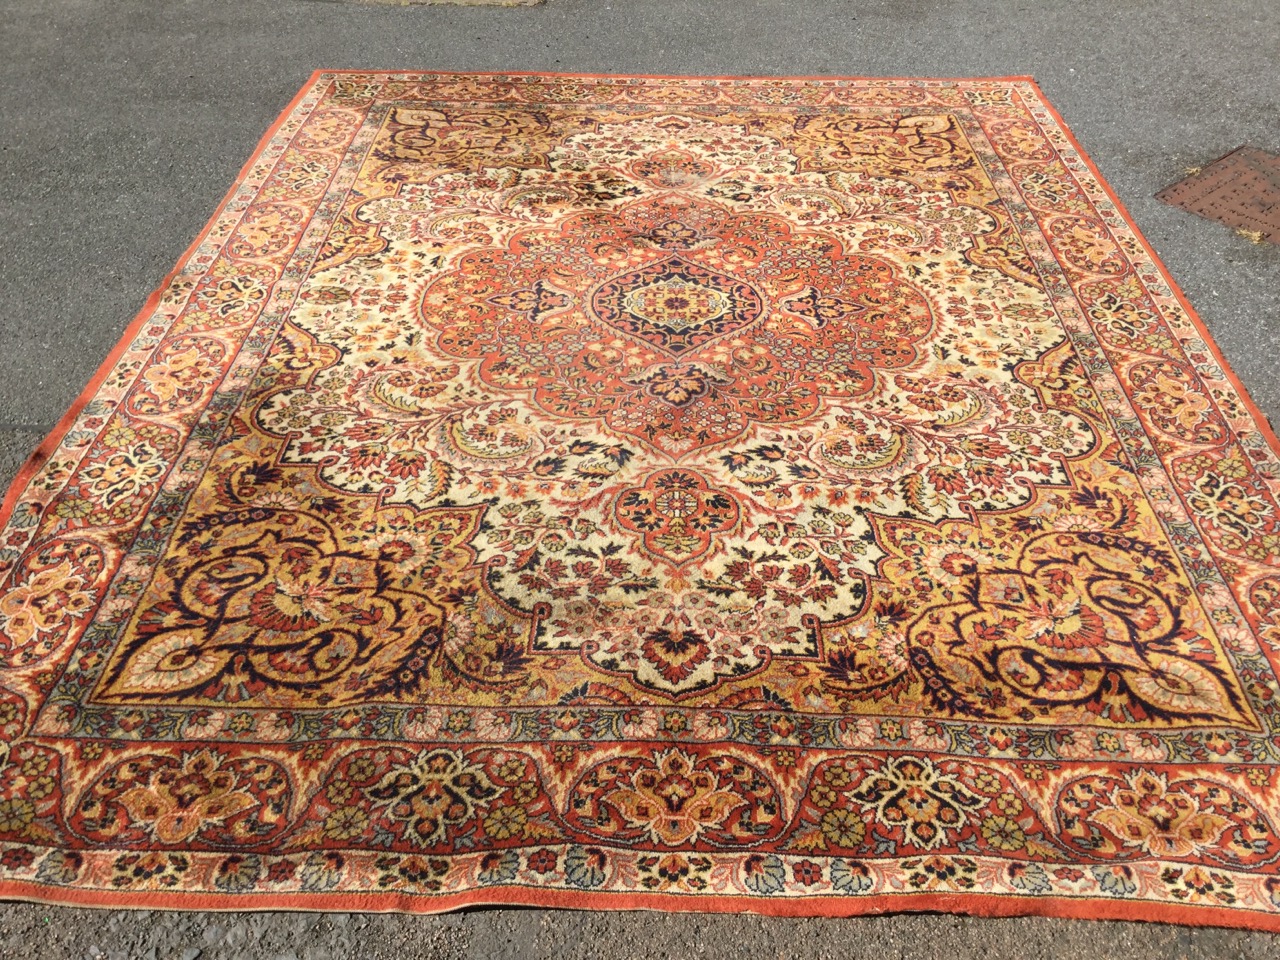 An oriental style Wilton carpet woven with scalloped central medallion on ivory field with golden